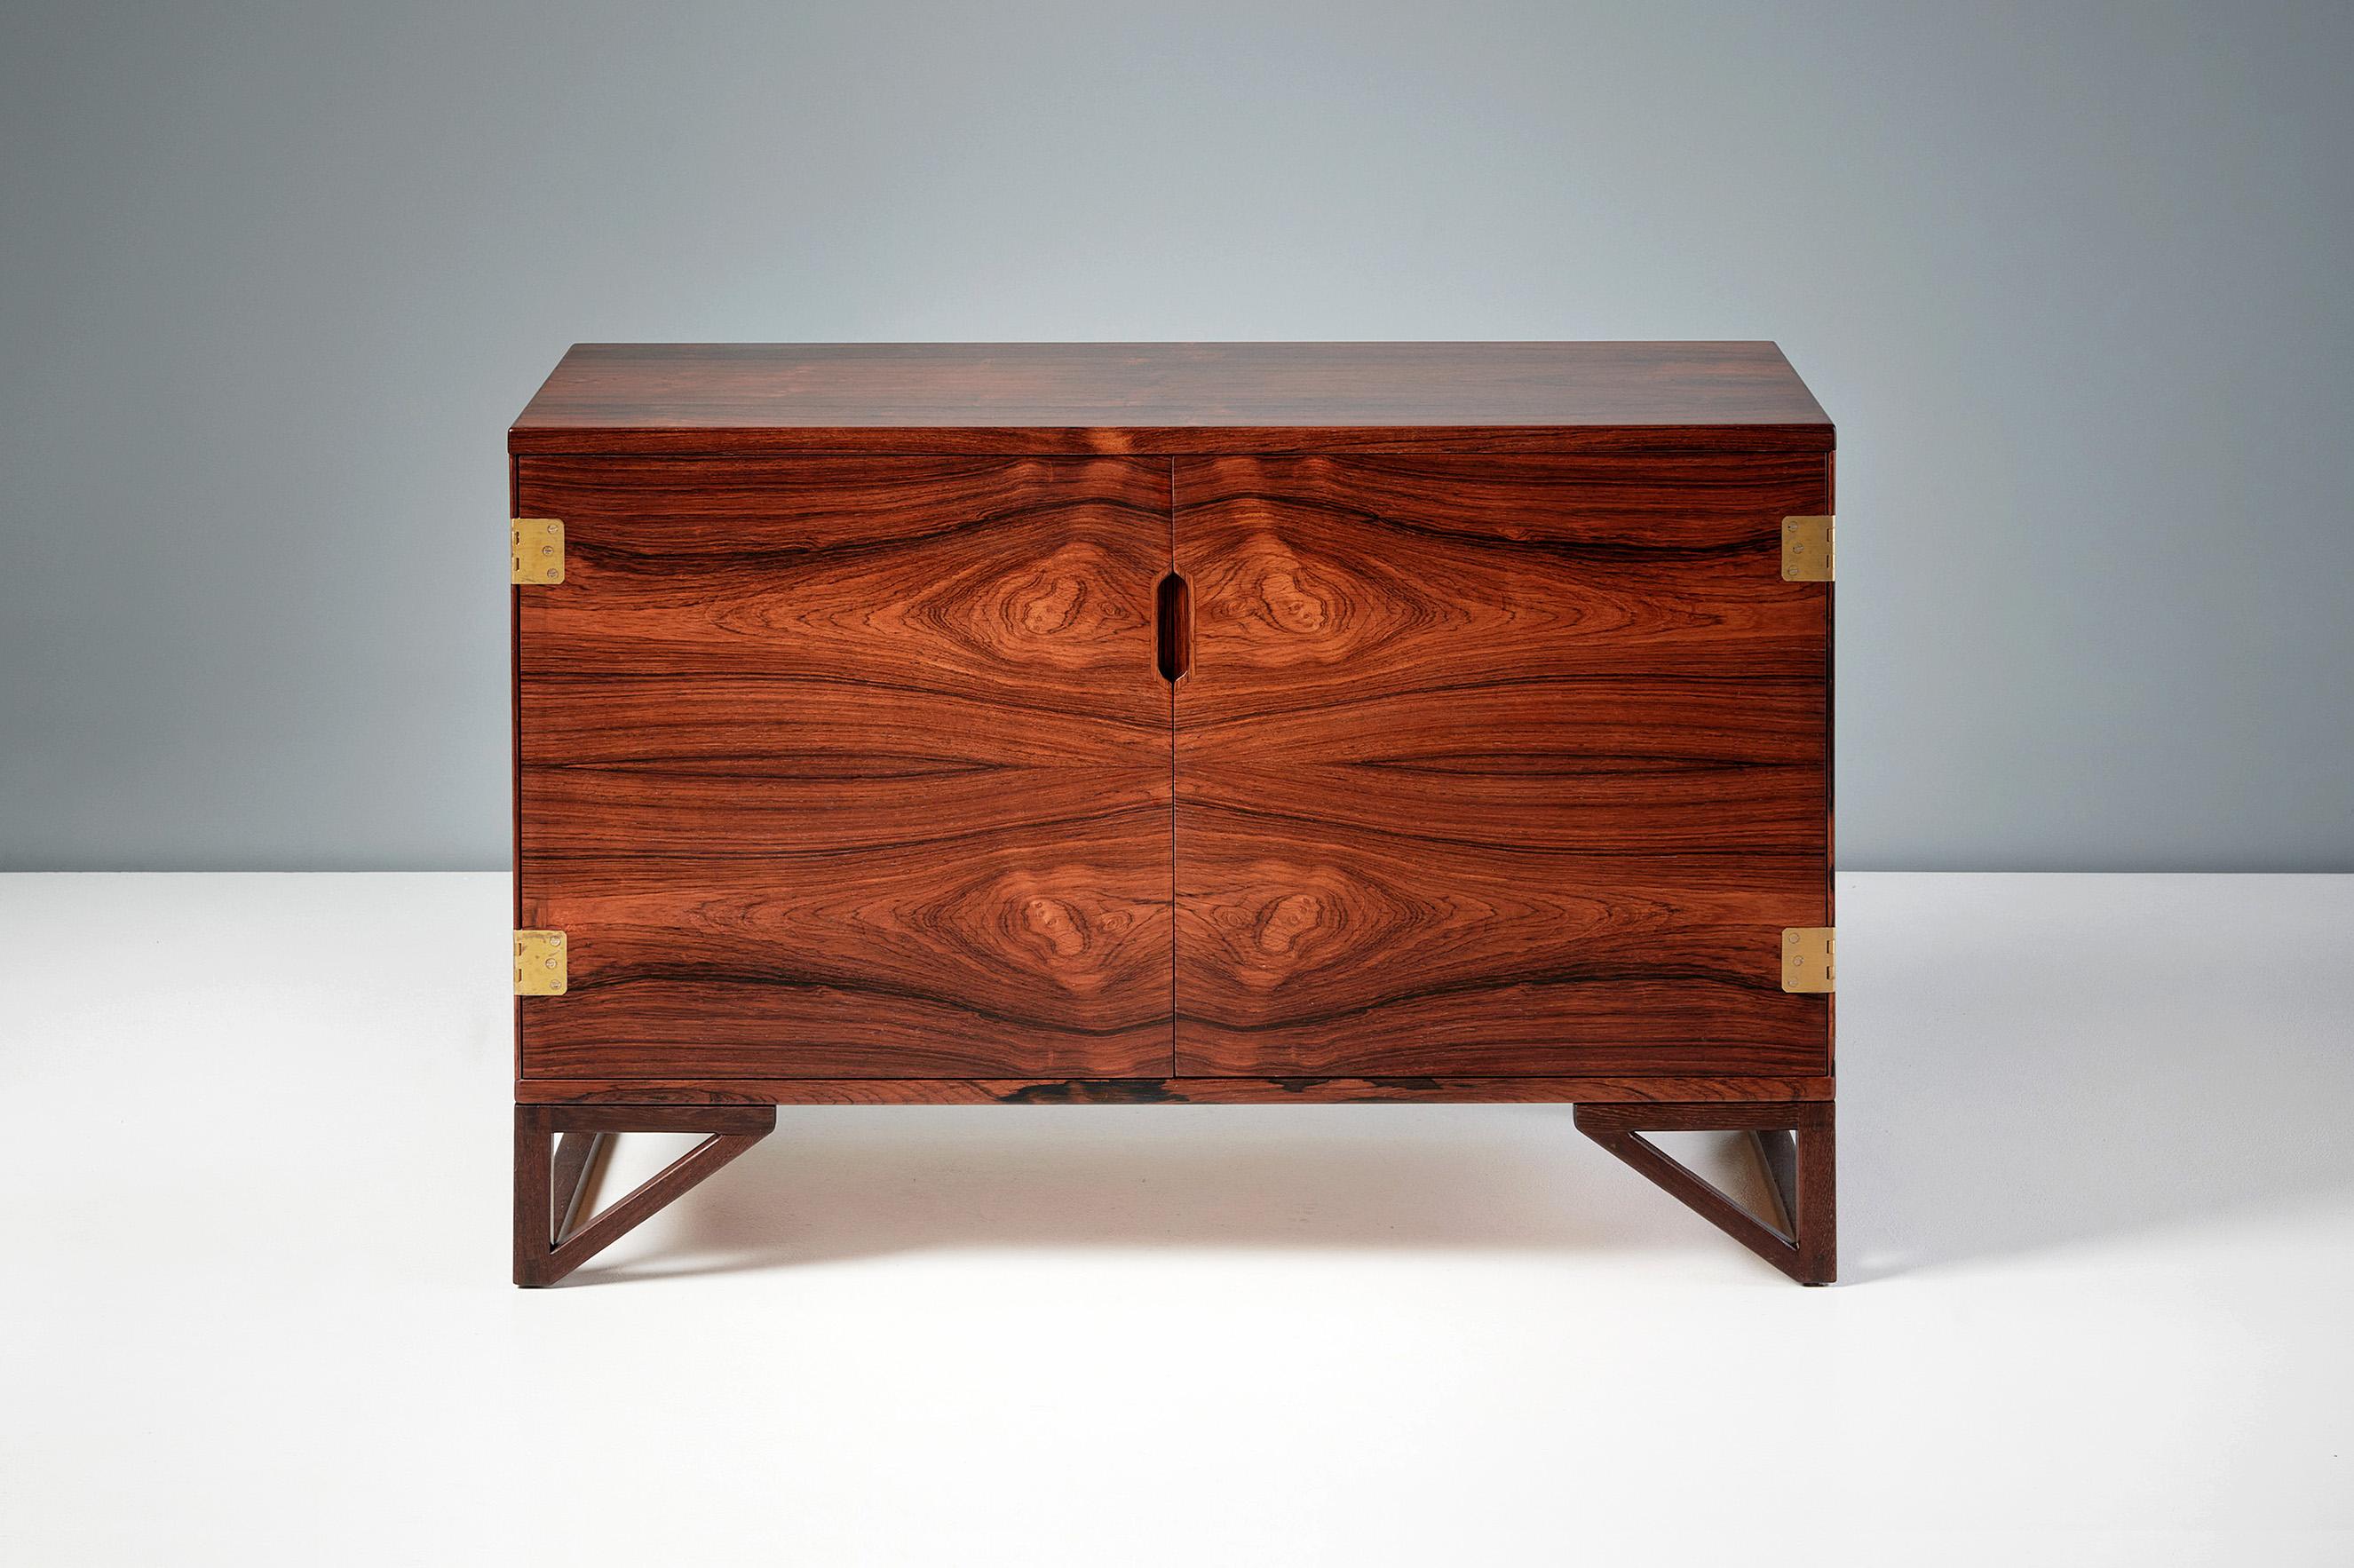 Sven Langkilde - Rosewood Cabinet

2-door cabinet made from exquisite rosewood designed by Sven Langkilde and produced by his own company Langkilde Mobler. The internal space is made from solid and veneered African mahogany with a mix of shelves and